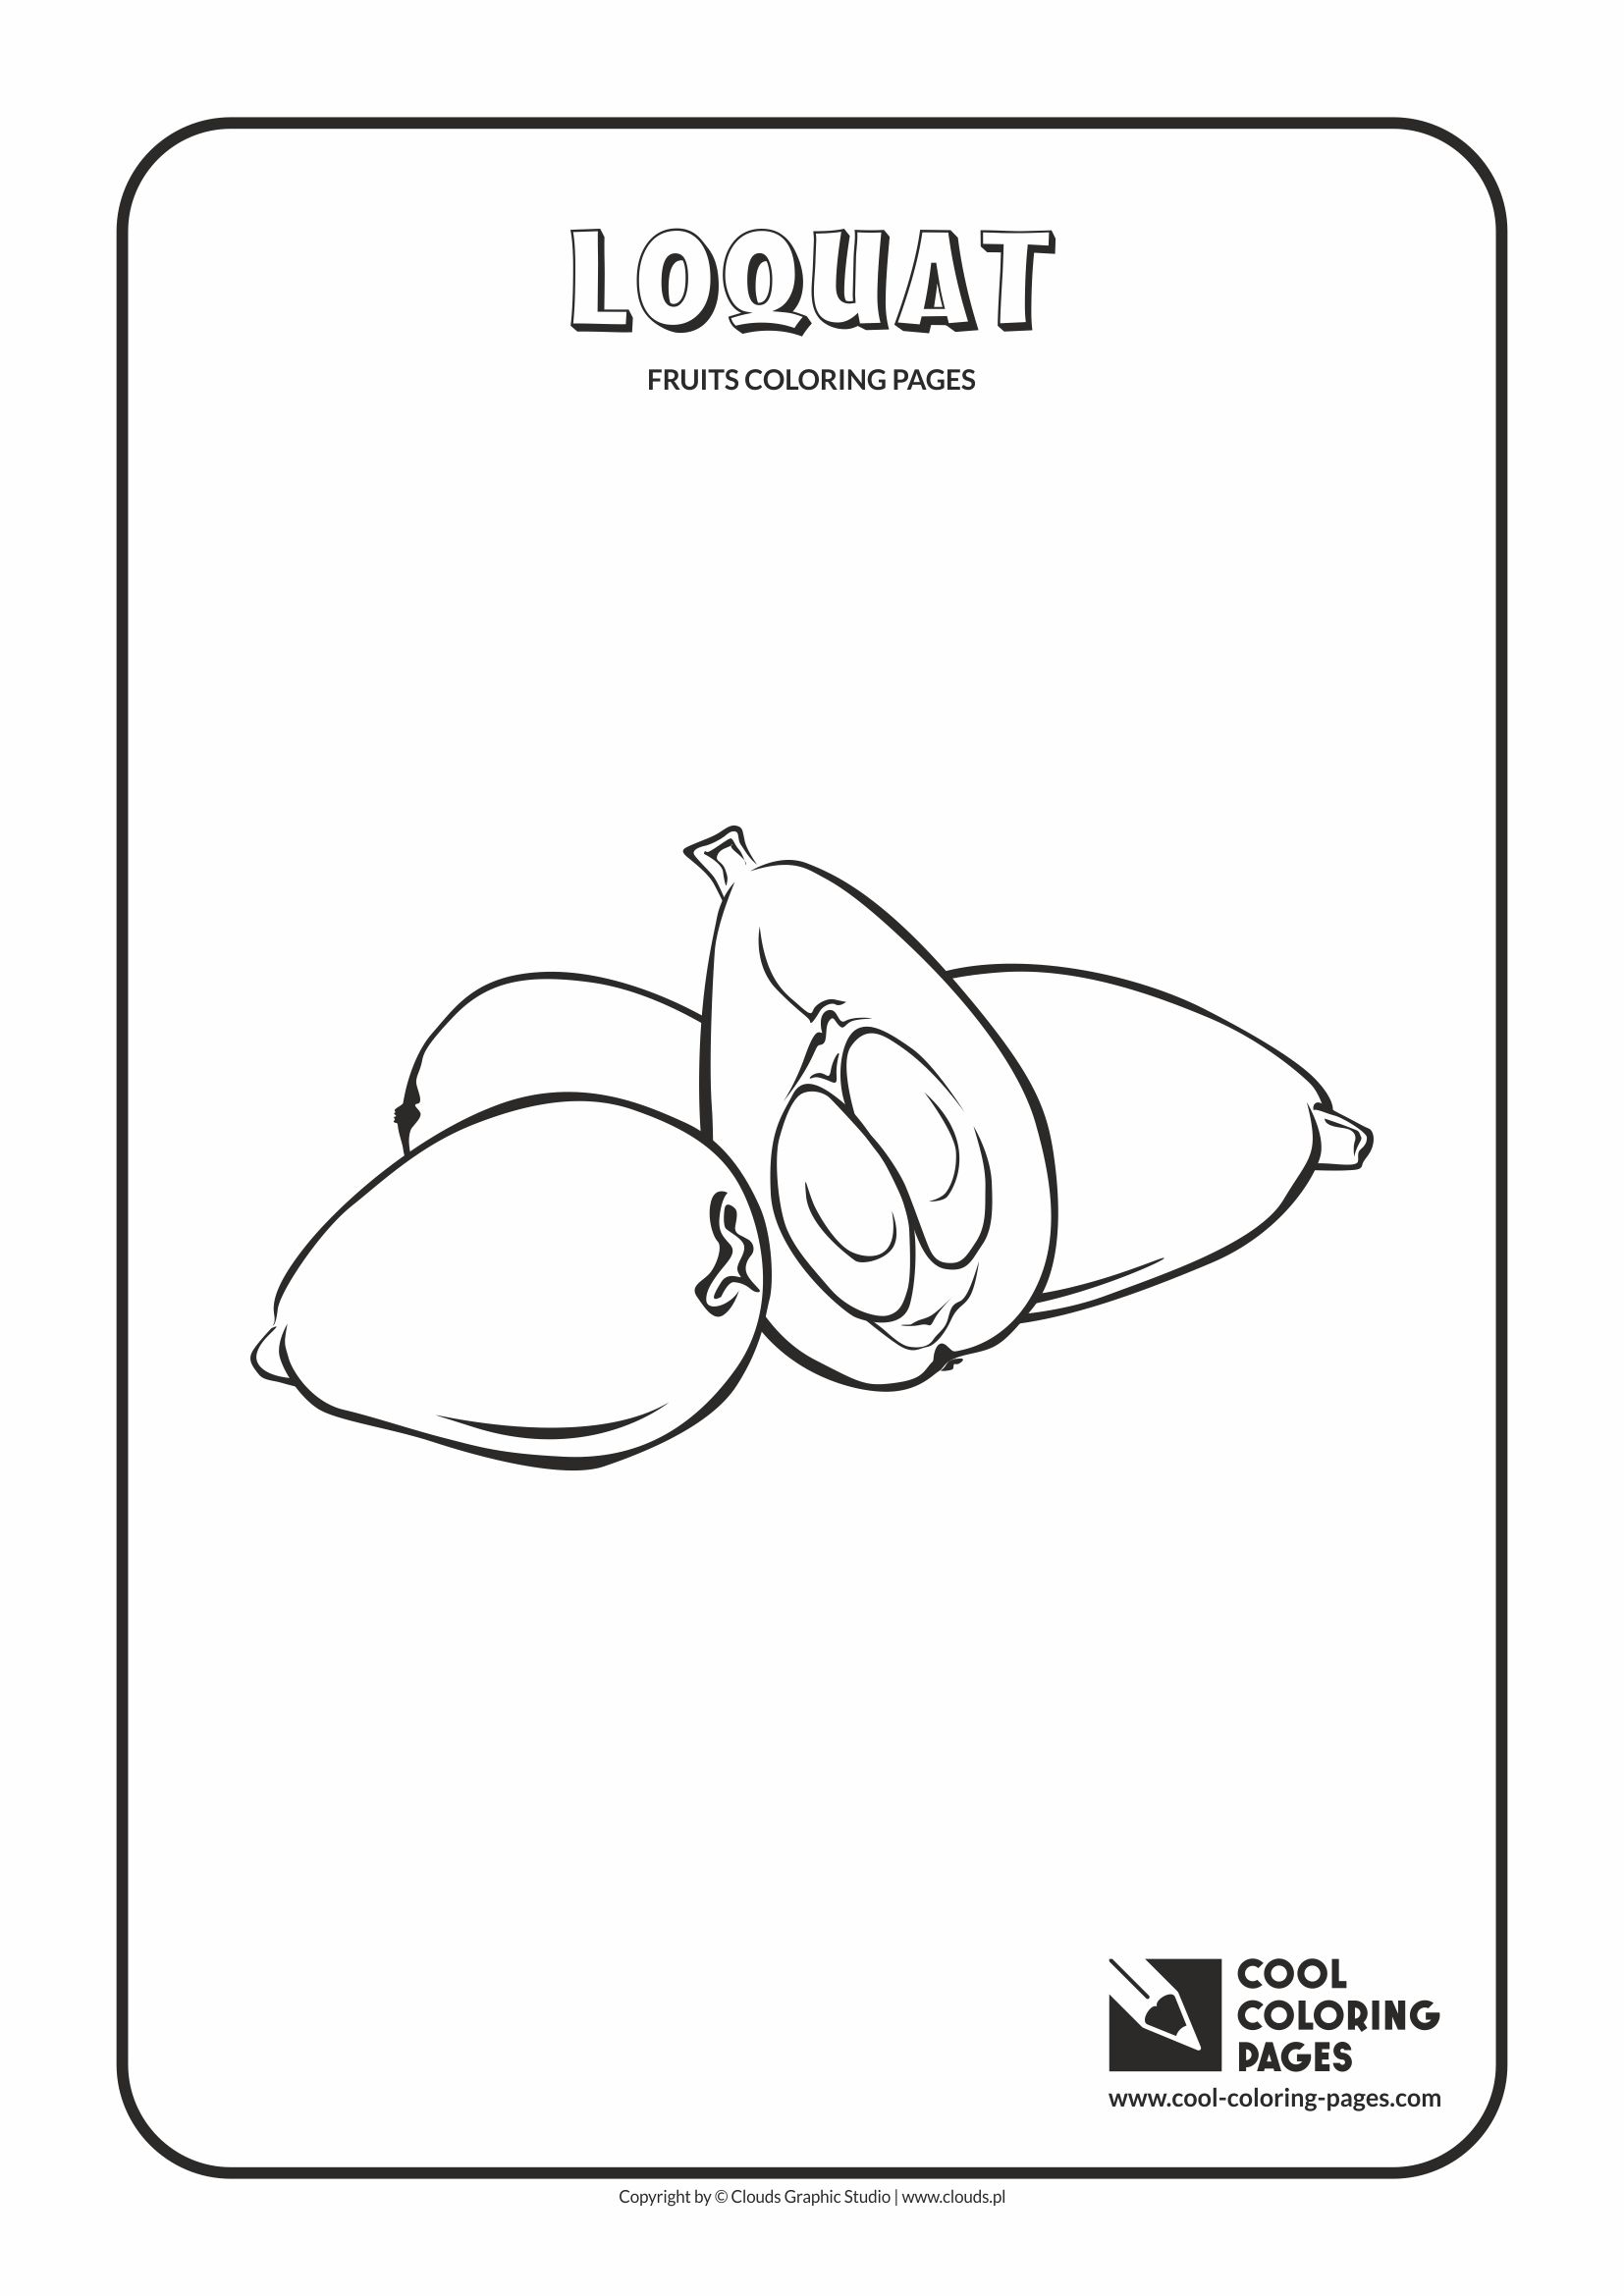 Cool Coloring Pages - Plants / Loquat / Coloring page with loquat